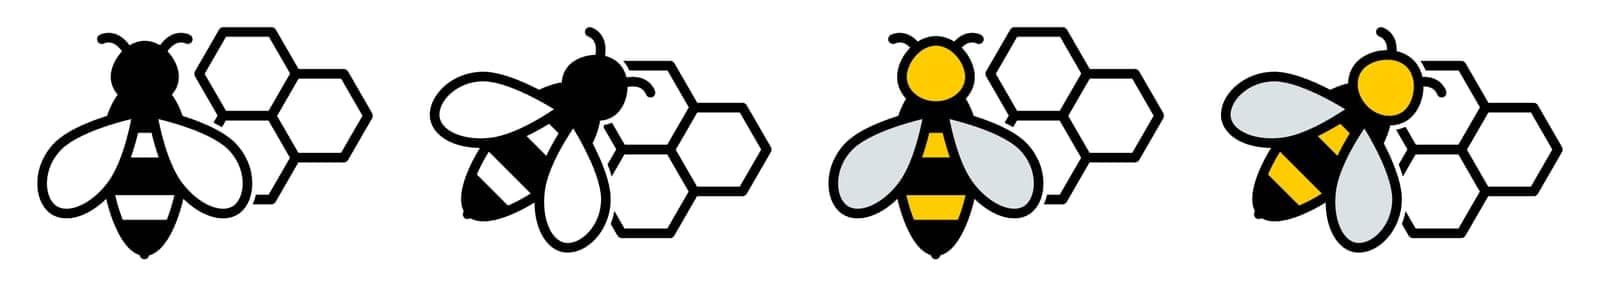 Simple bee and honeycomb icon. Black and white / coloured version